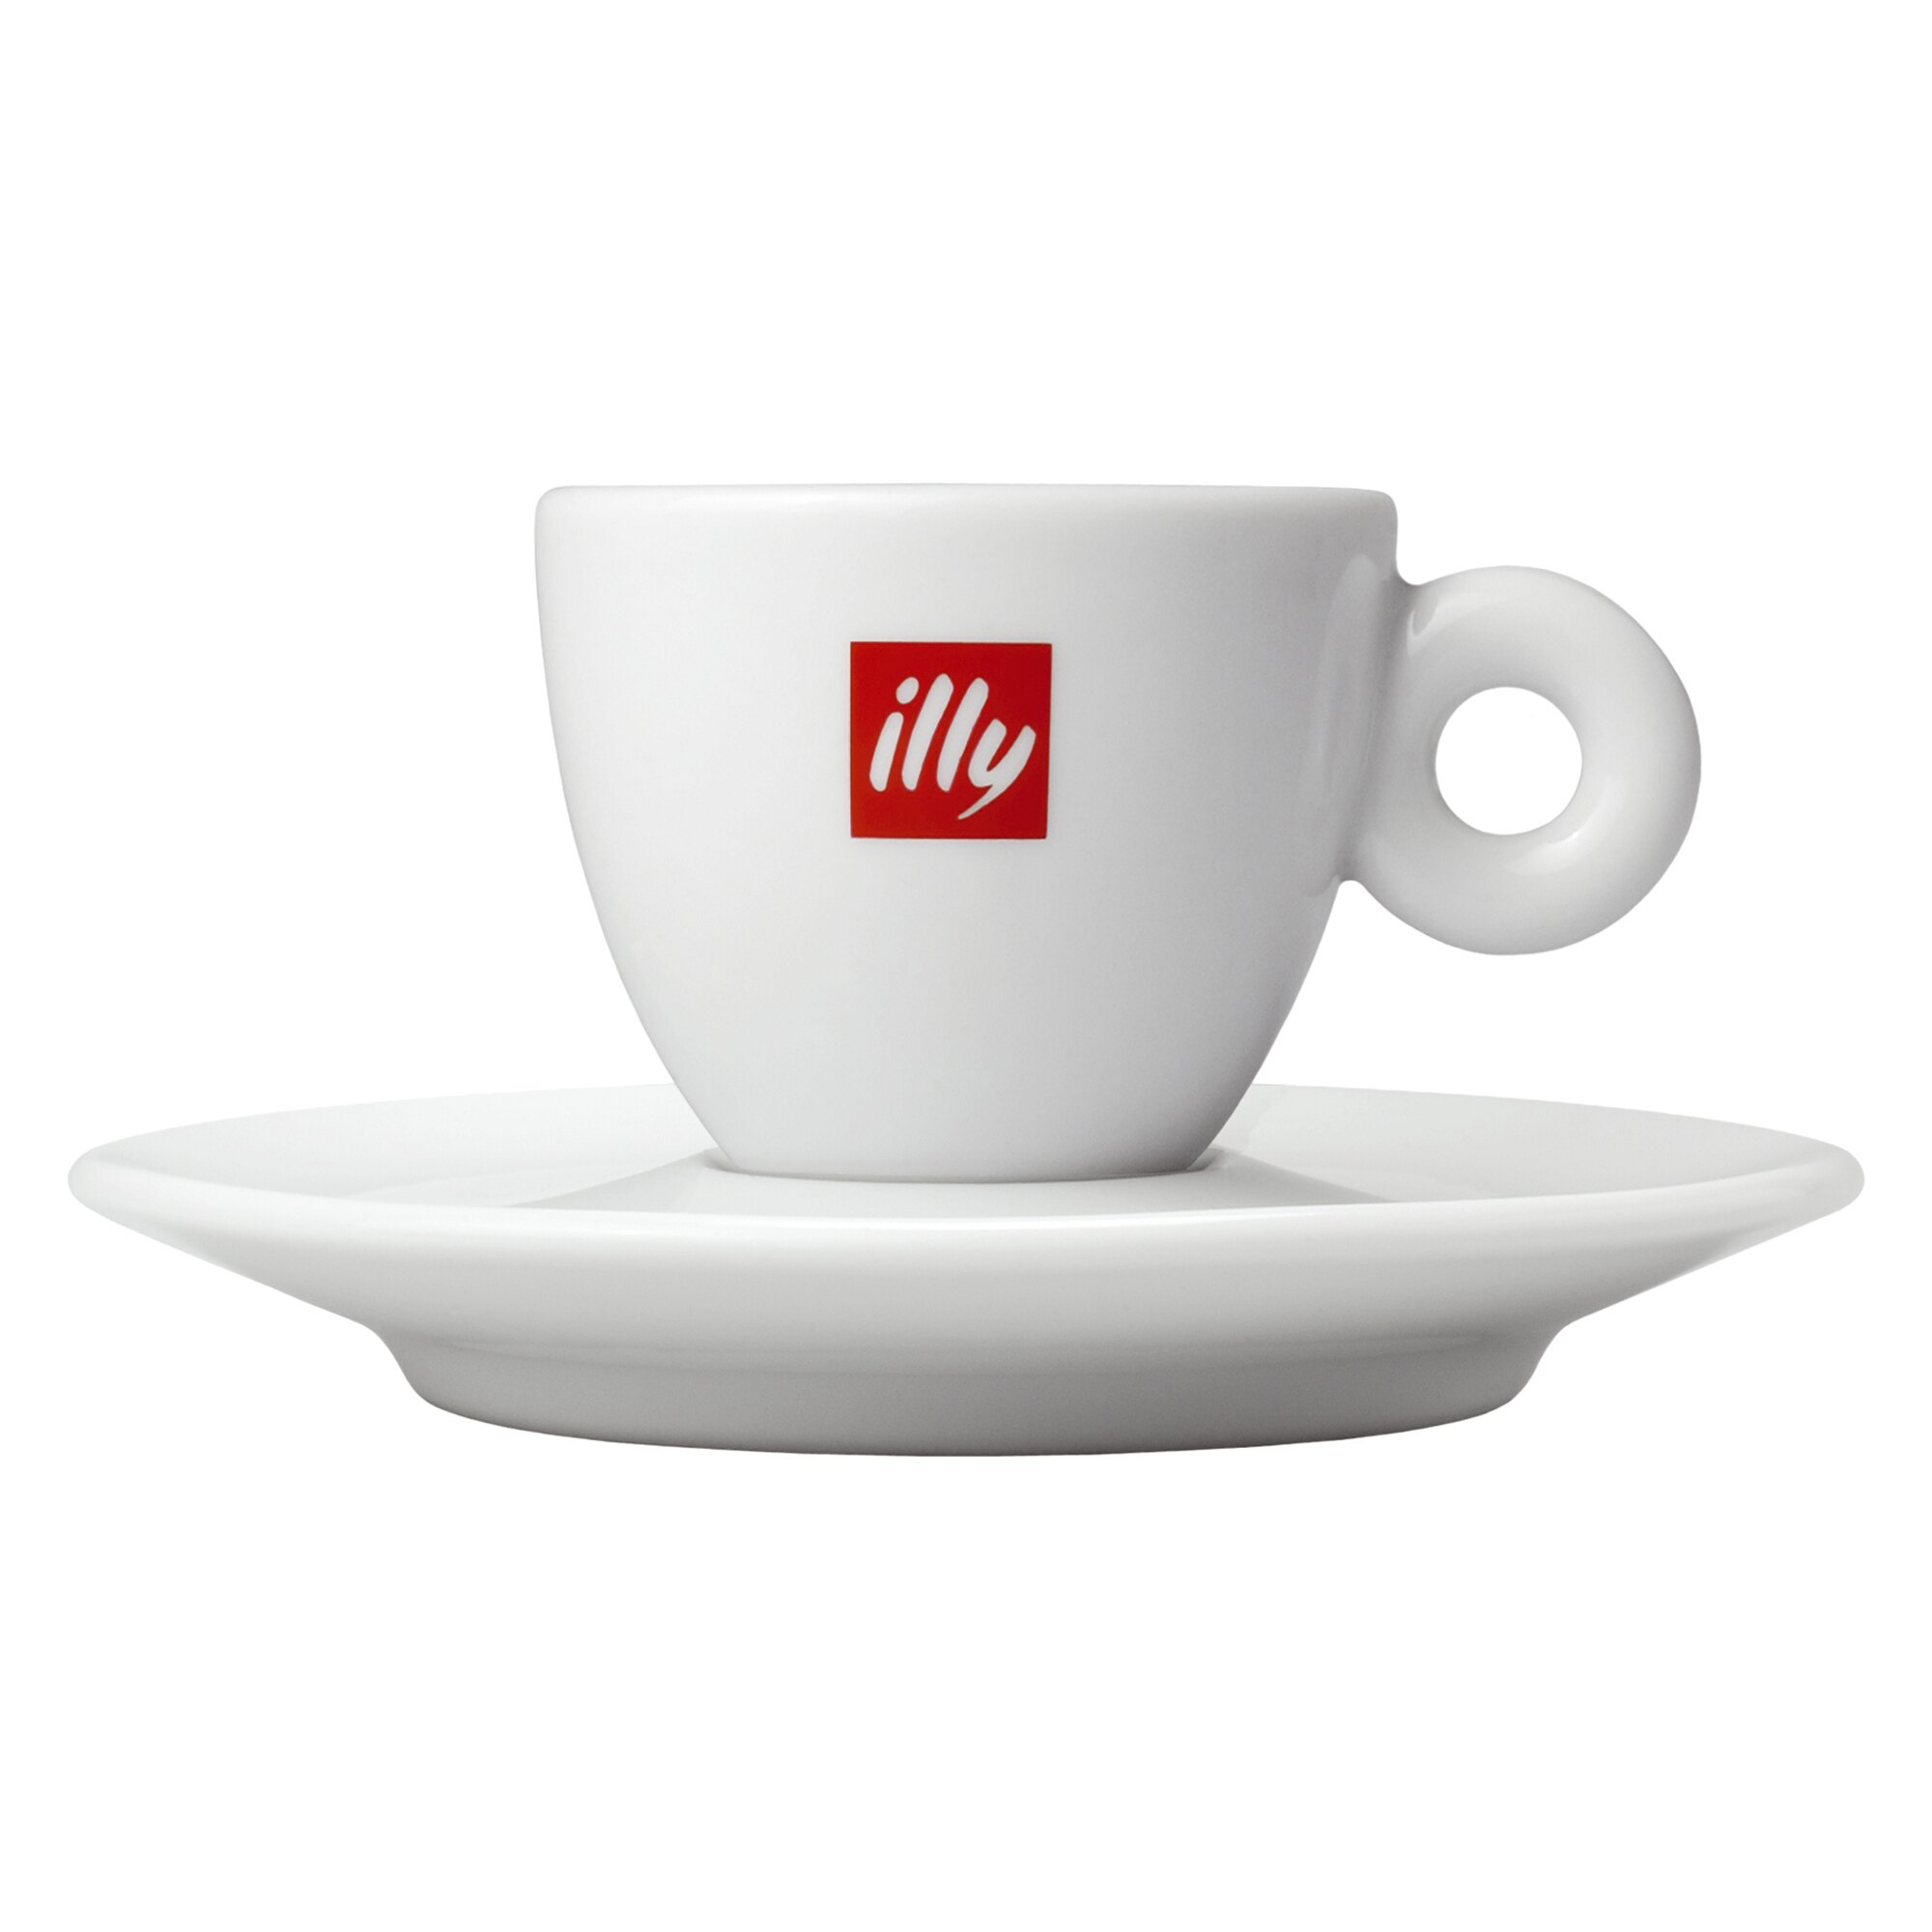 Illy SPAL Portugal Cup & Saucer Illy Espresso Demitasse 2 oz Ceramic White Red Logo 